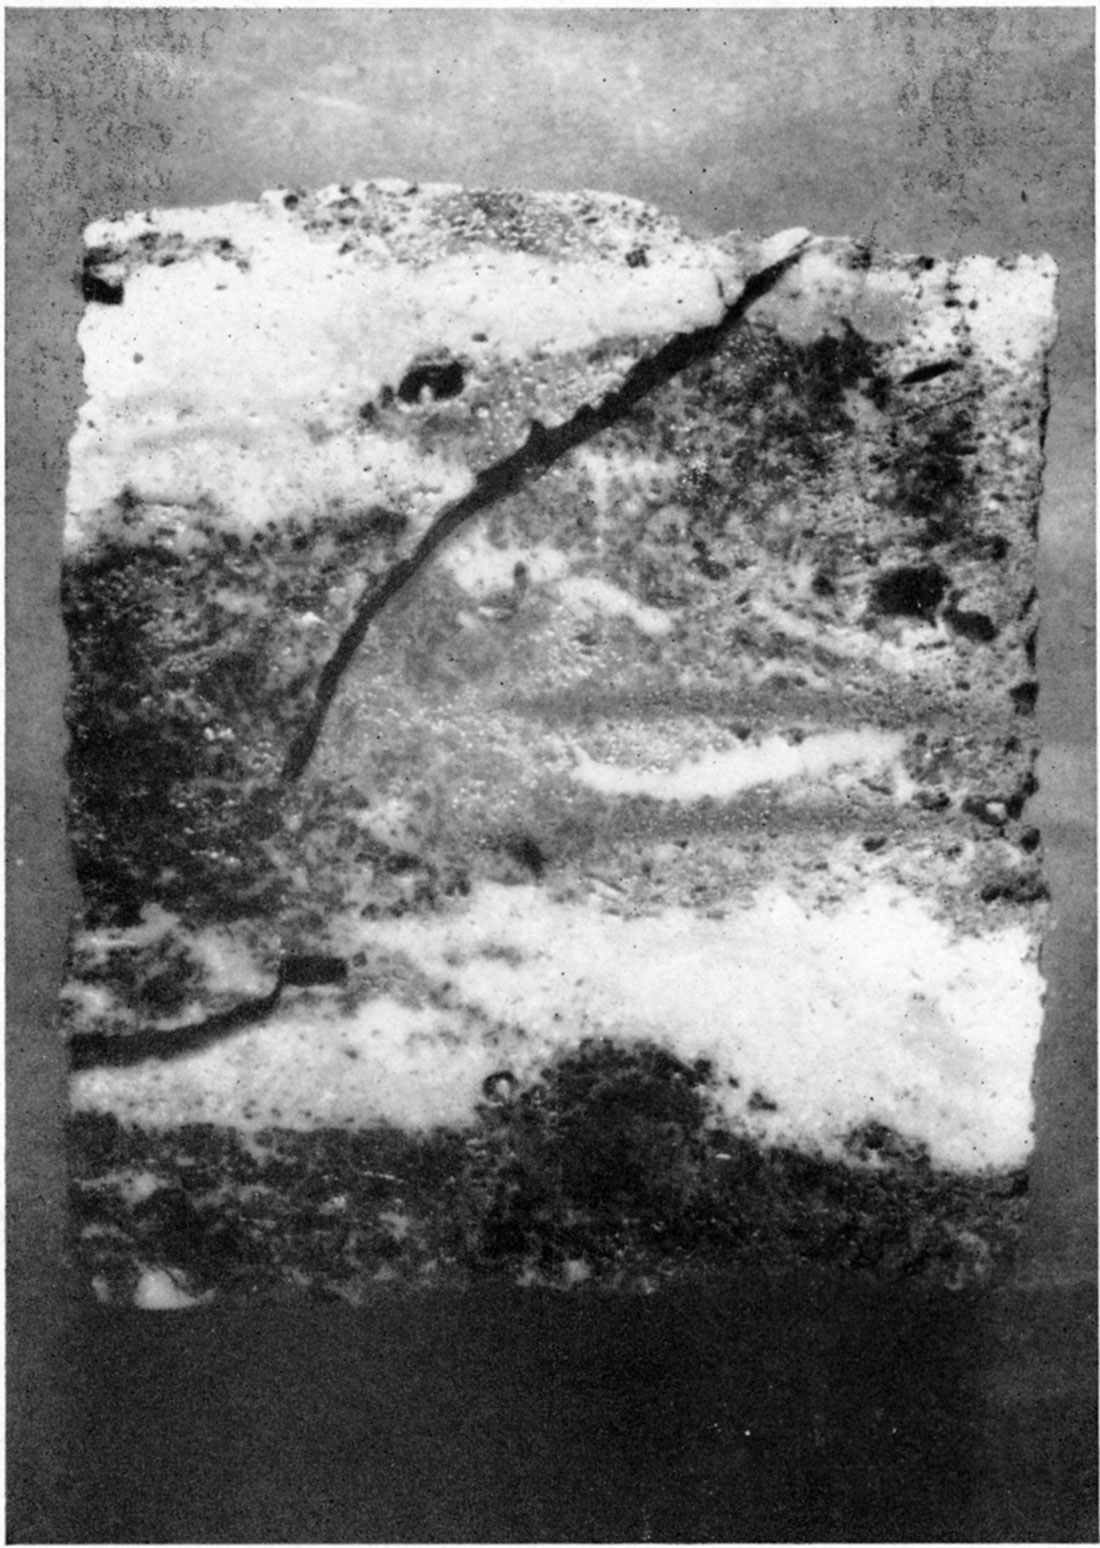 Photograph of core from dolomite yielding oil in undifferentiated Burlington and Keokuk limestones of Mississippian age.